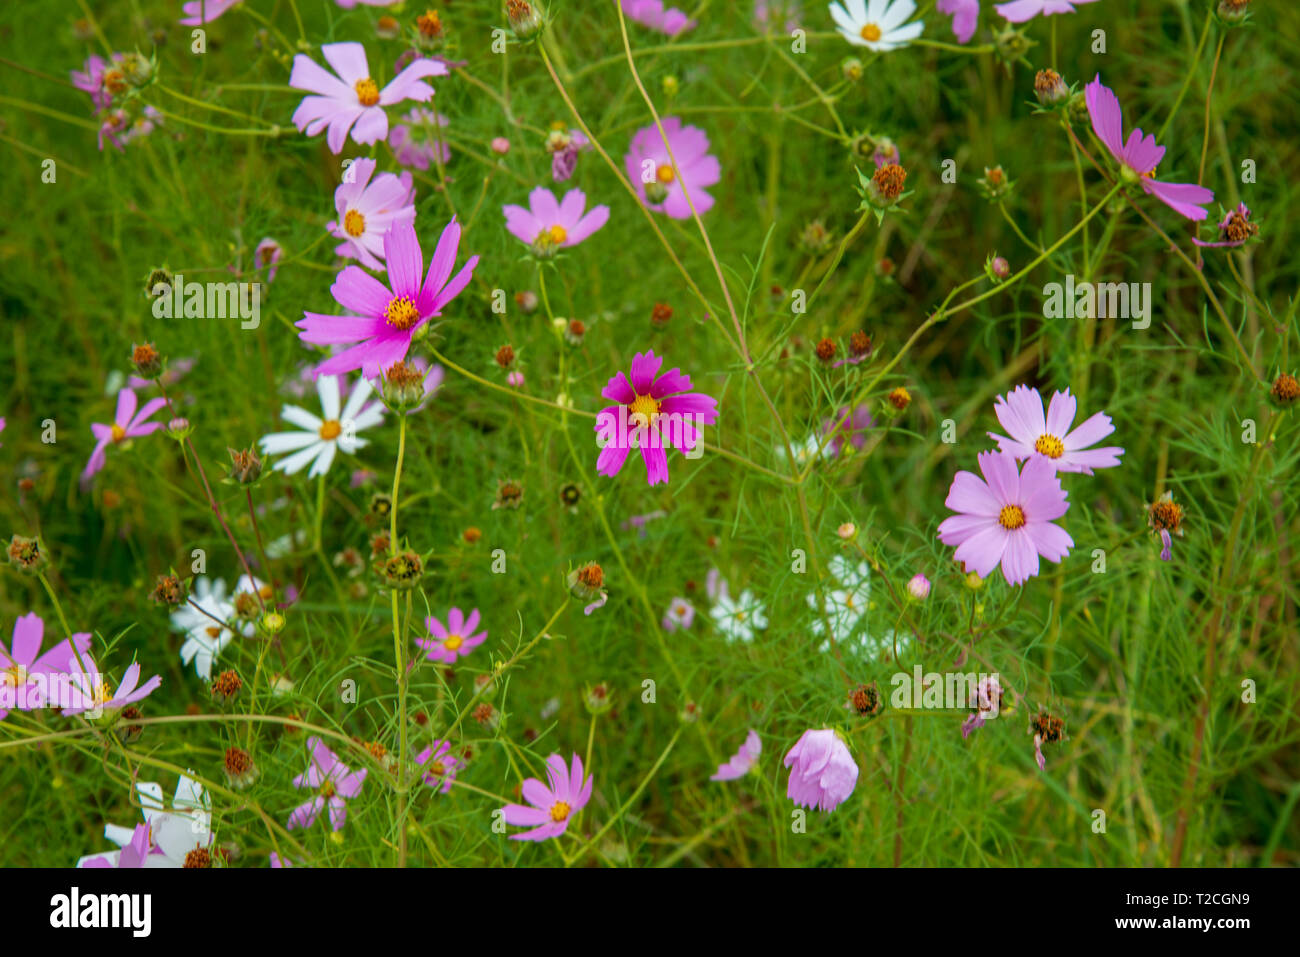 Johannesburg, South Africa, 1st April, 2019. Rain clouds roll in over a field of Cosmos flowers in Delta Park. Cosmos bloom here in March, as autumn starts, as well as in November. Credit: Eva-Lotta Jansson/Alamy News Stock Photo